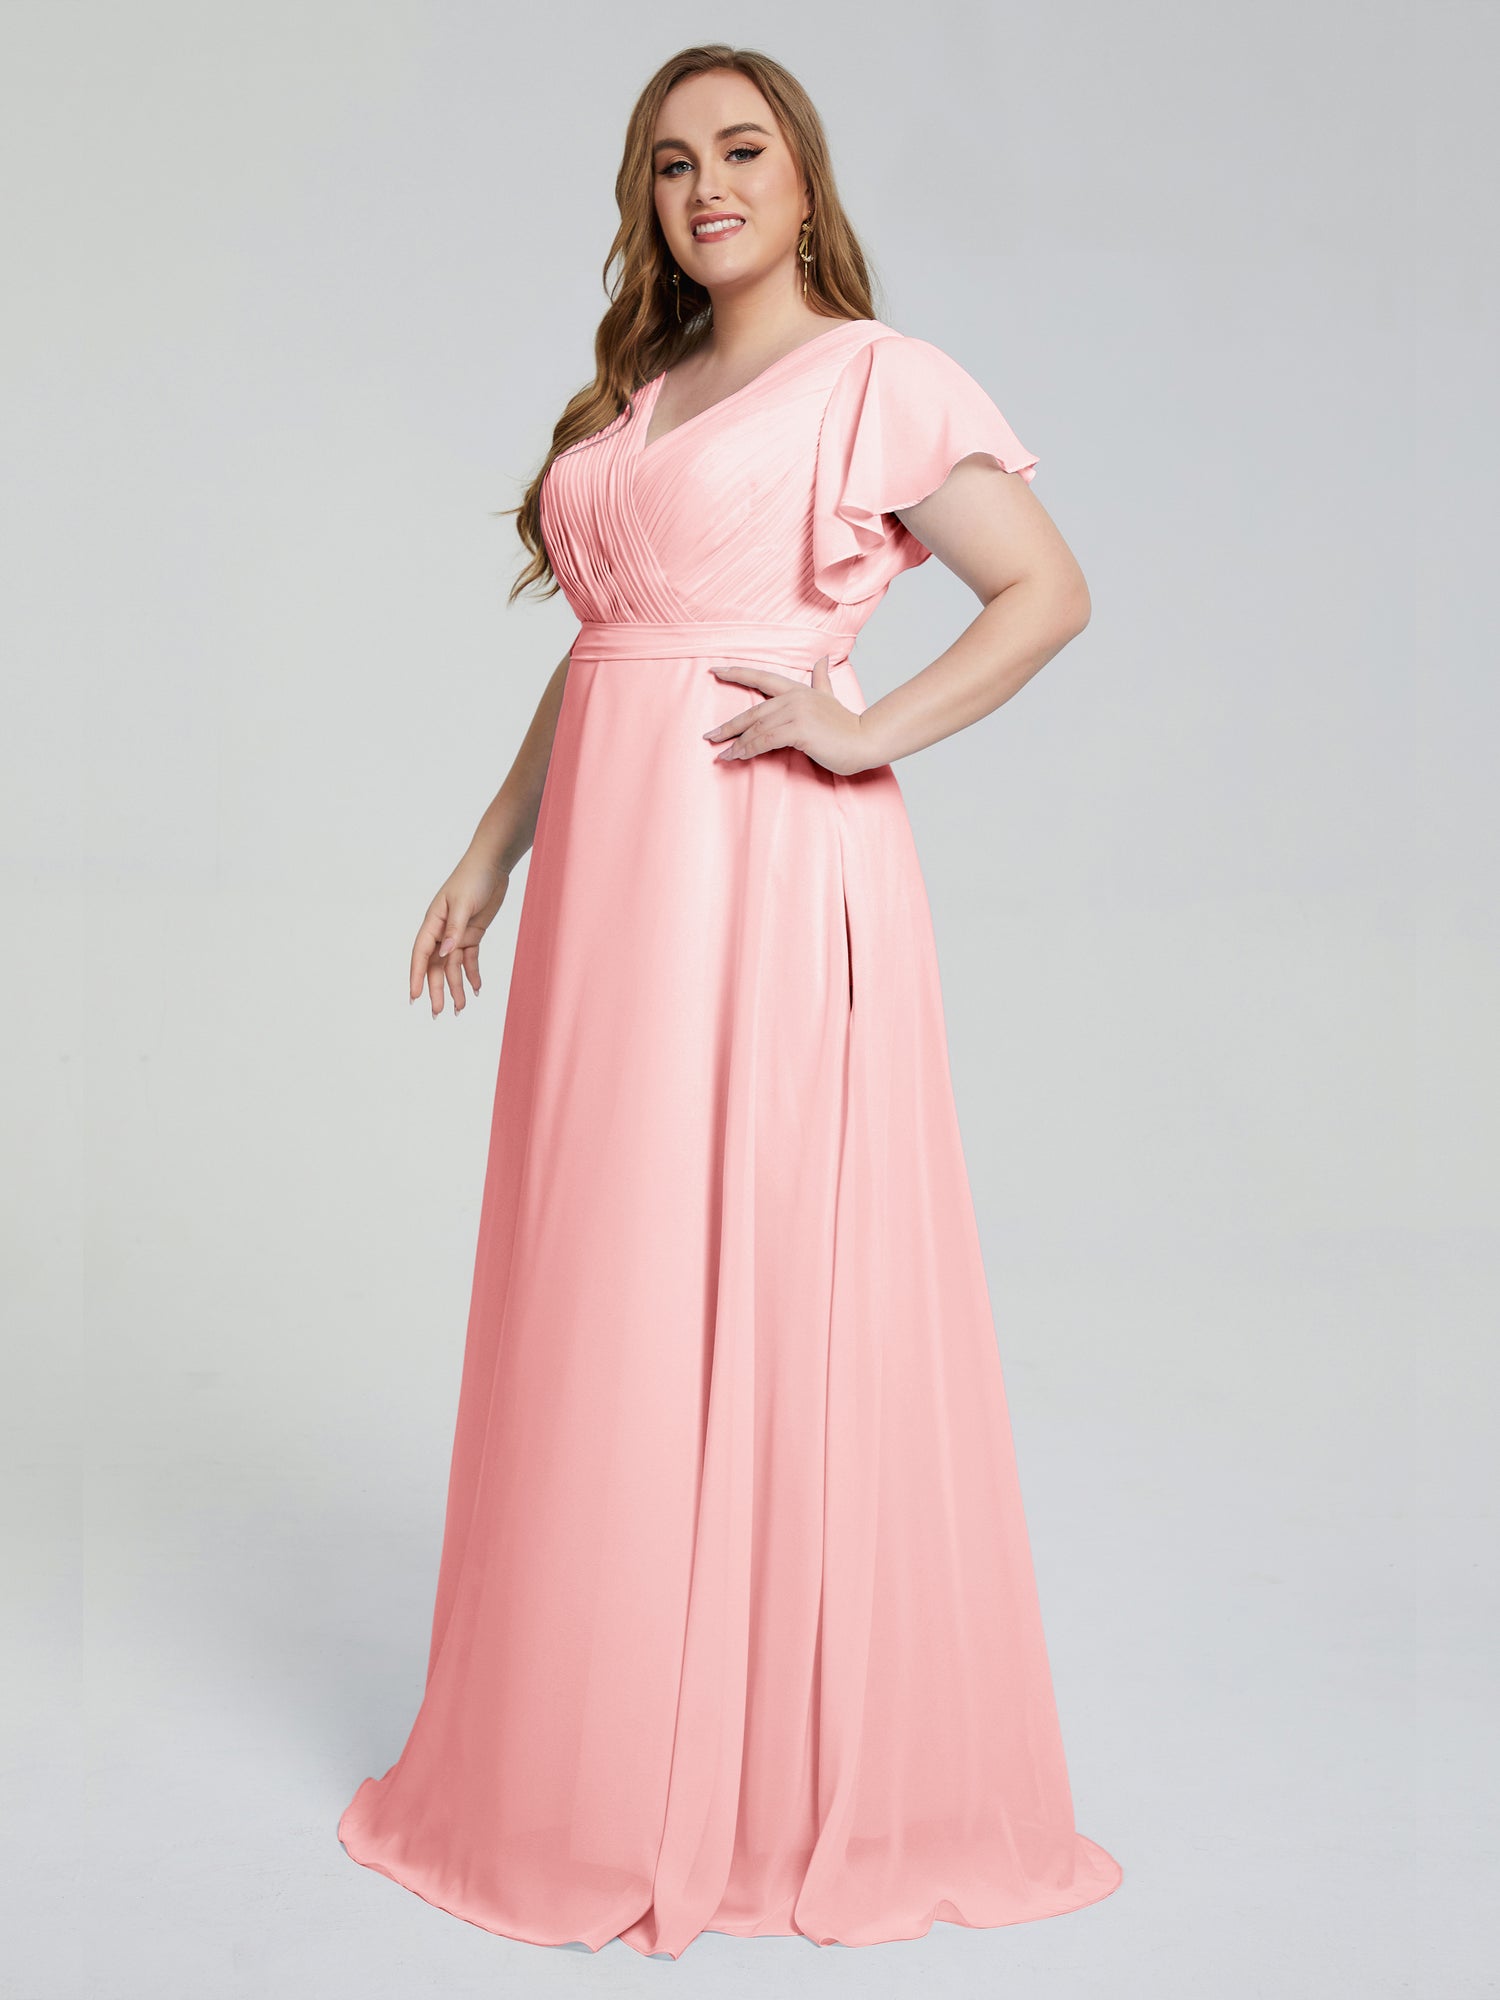 Tangerine Plus Size Clothing for Women for sale